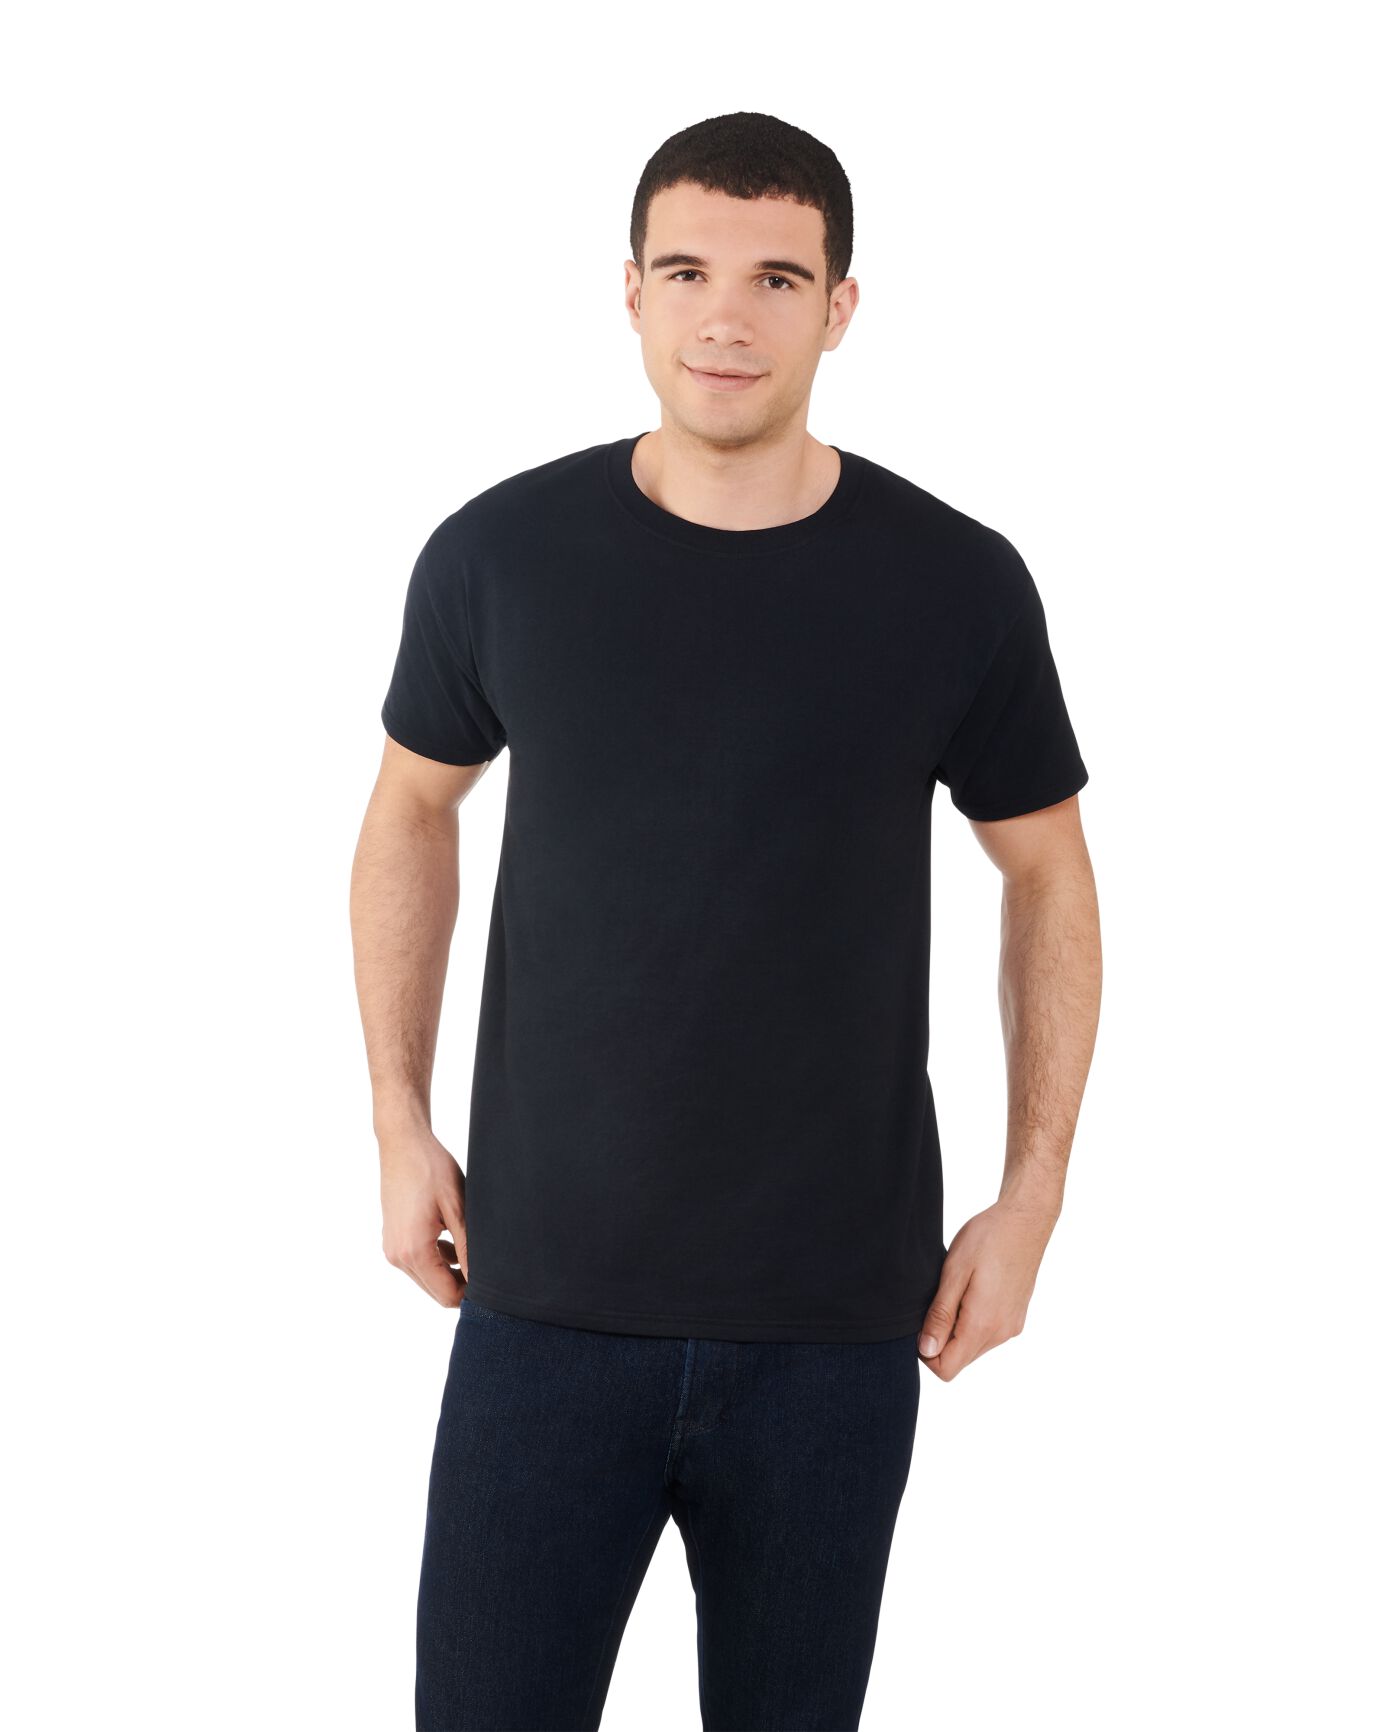 PLAIN BLACK USA T-SHIRT- UNFORGETTABLE GIFT- AMERICAN T-SHIRT -TOP QUALITY-LOWEST PRICE GAURANTEED-DO NOT MISS THIS CHANCE-FREE HOME(POST OFFICE) DELIVERY-ART NO. 61036-REA 27%